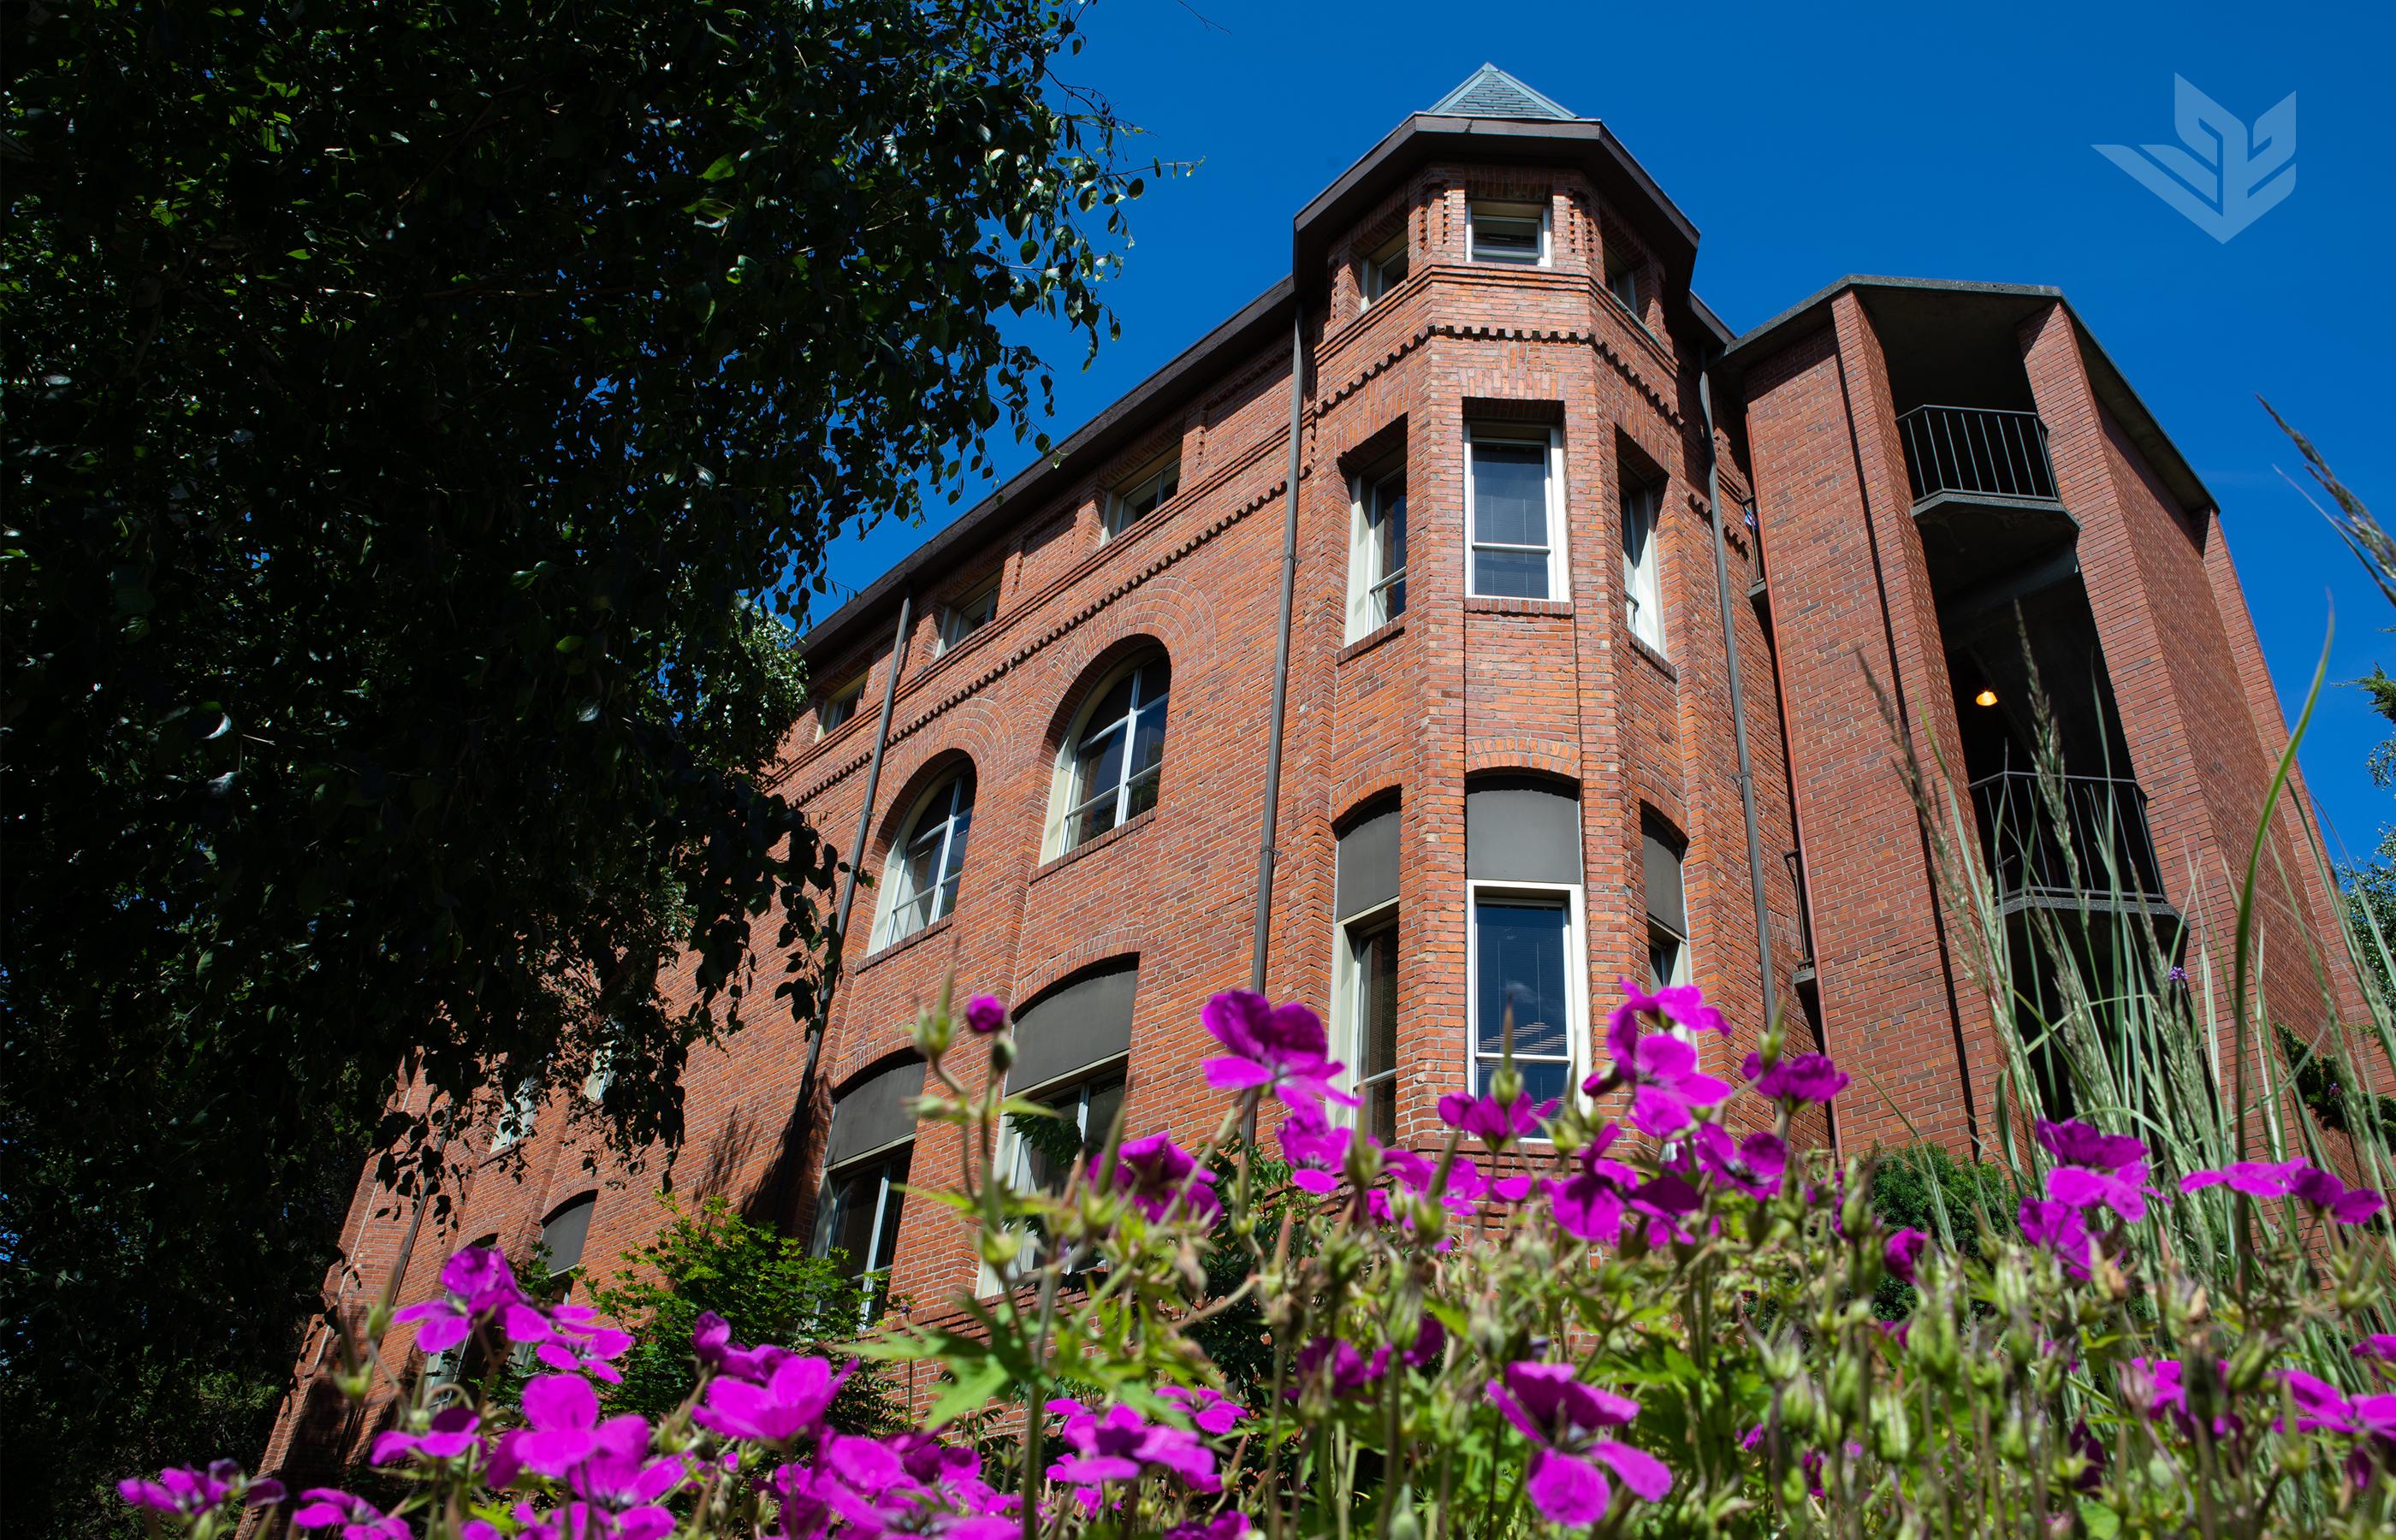 A summertime image of historic Alexander and Adelaide Hall on the Seattle Pacific University campus.